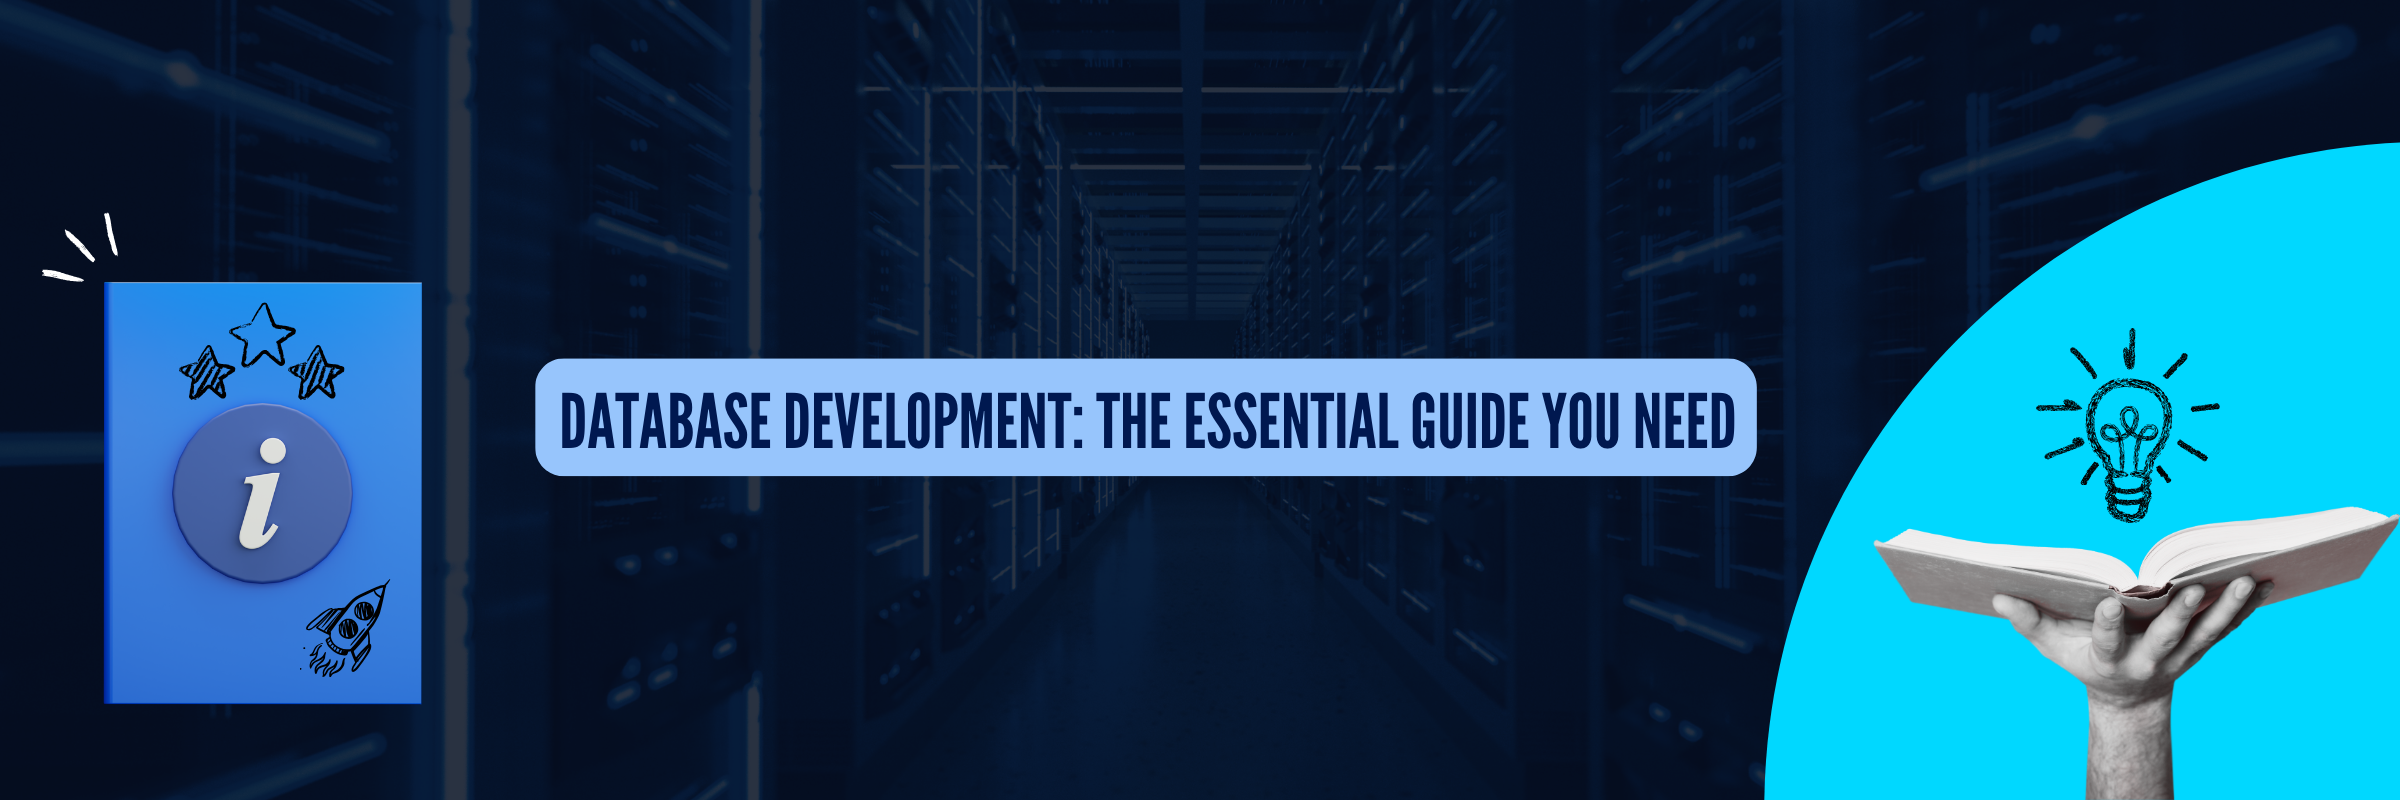 Database Development: The Essential Guide You Need